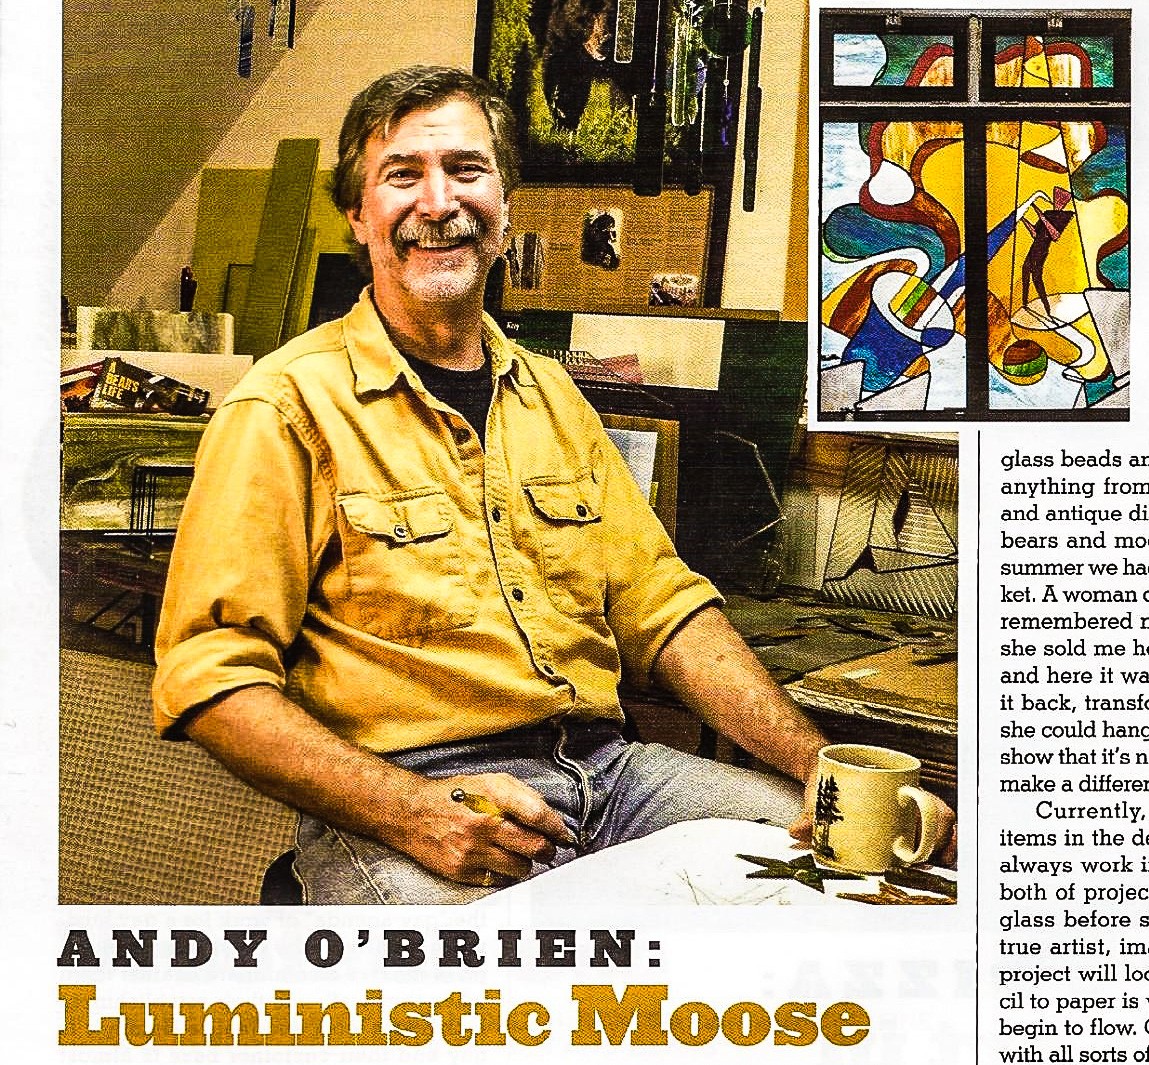 Andy sitting in his So. Vermont workroom, as seen in "A Bear's Life"magazine photo.